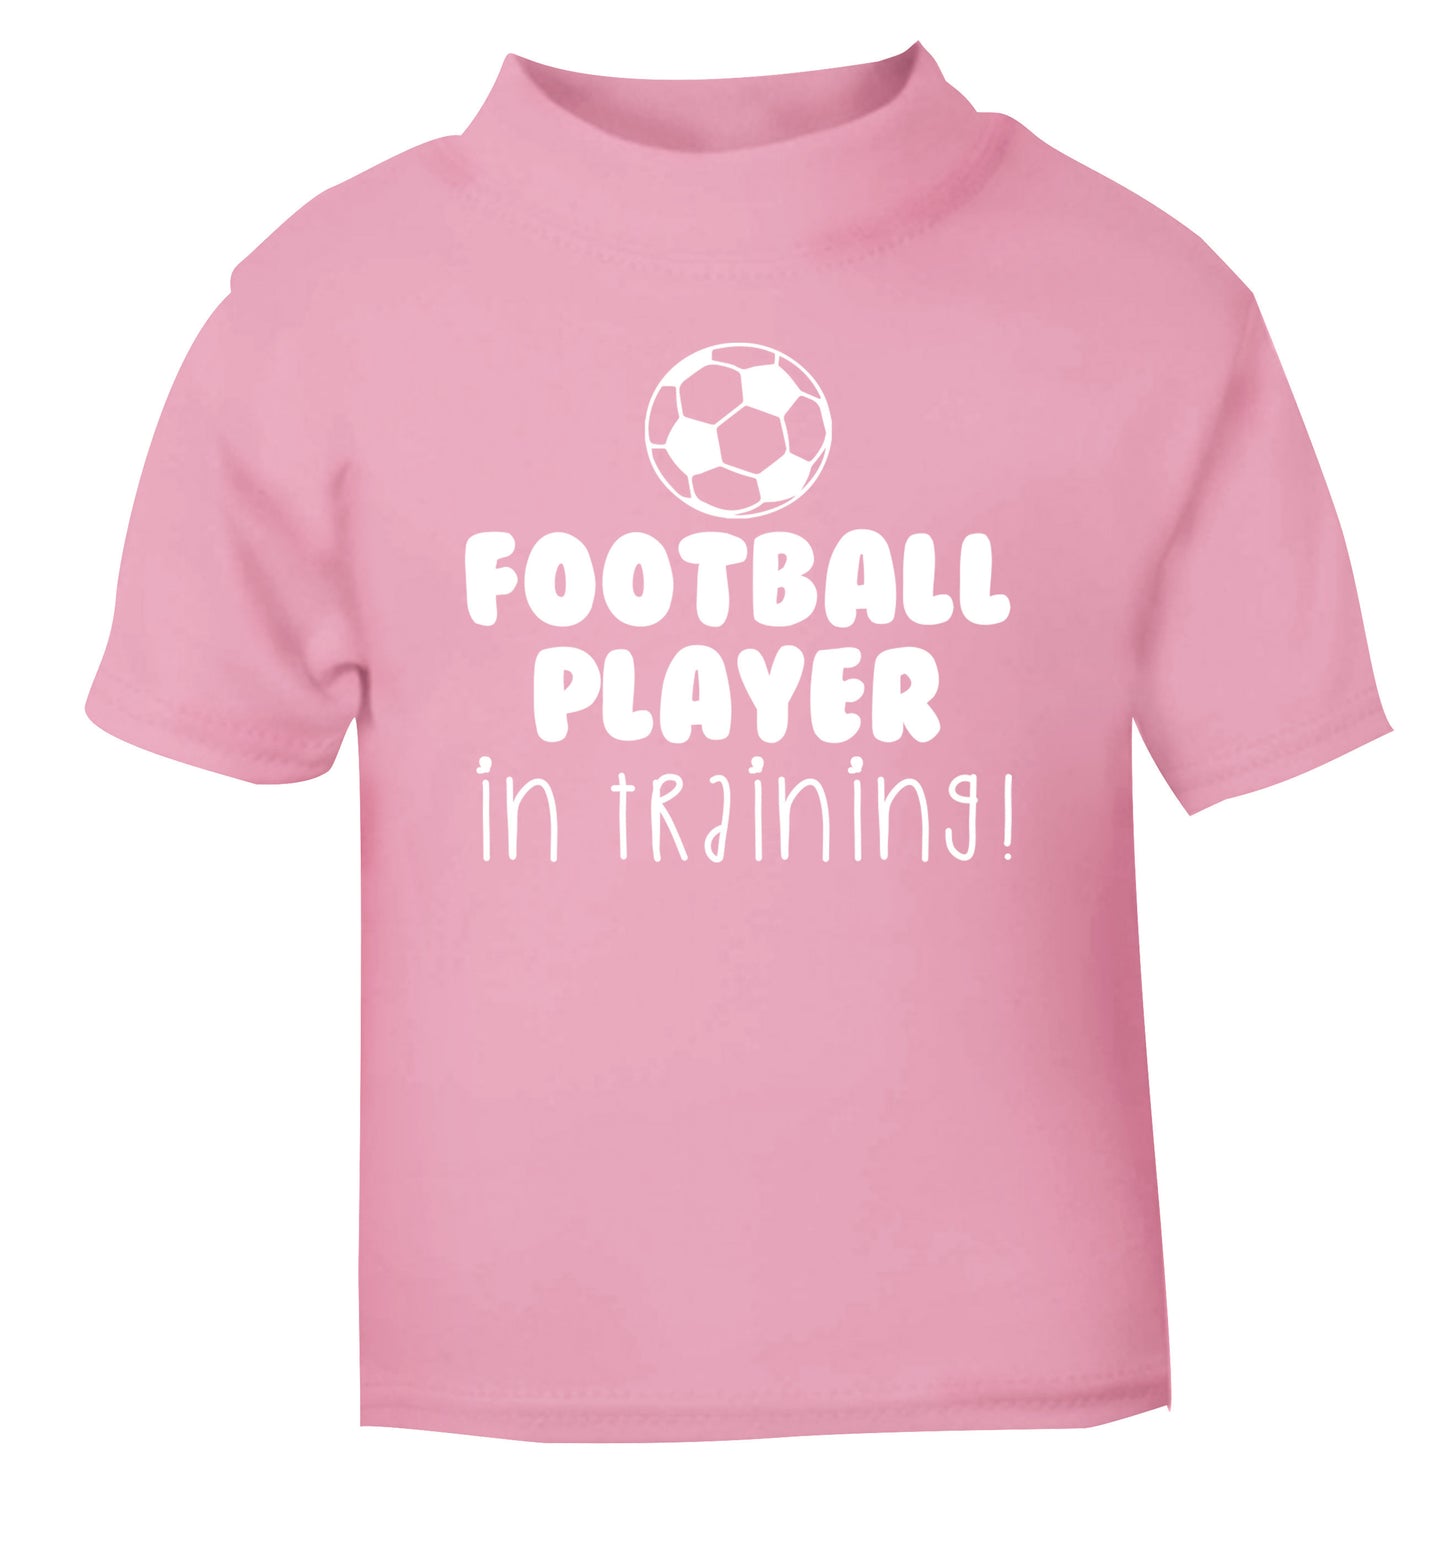 Football player in training light pink Baby Toddler Tshirt 2 Years